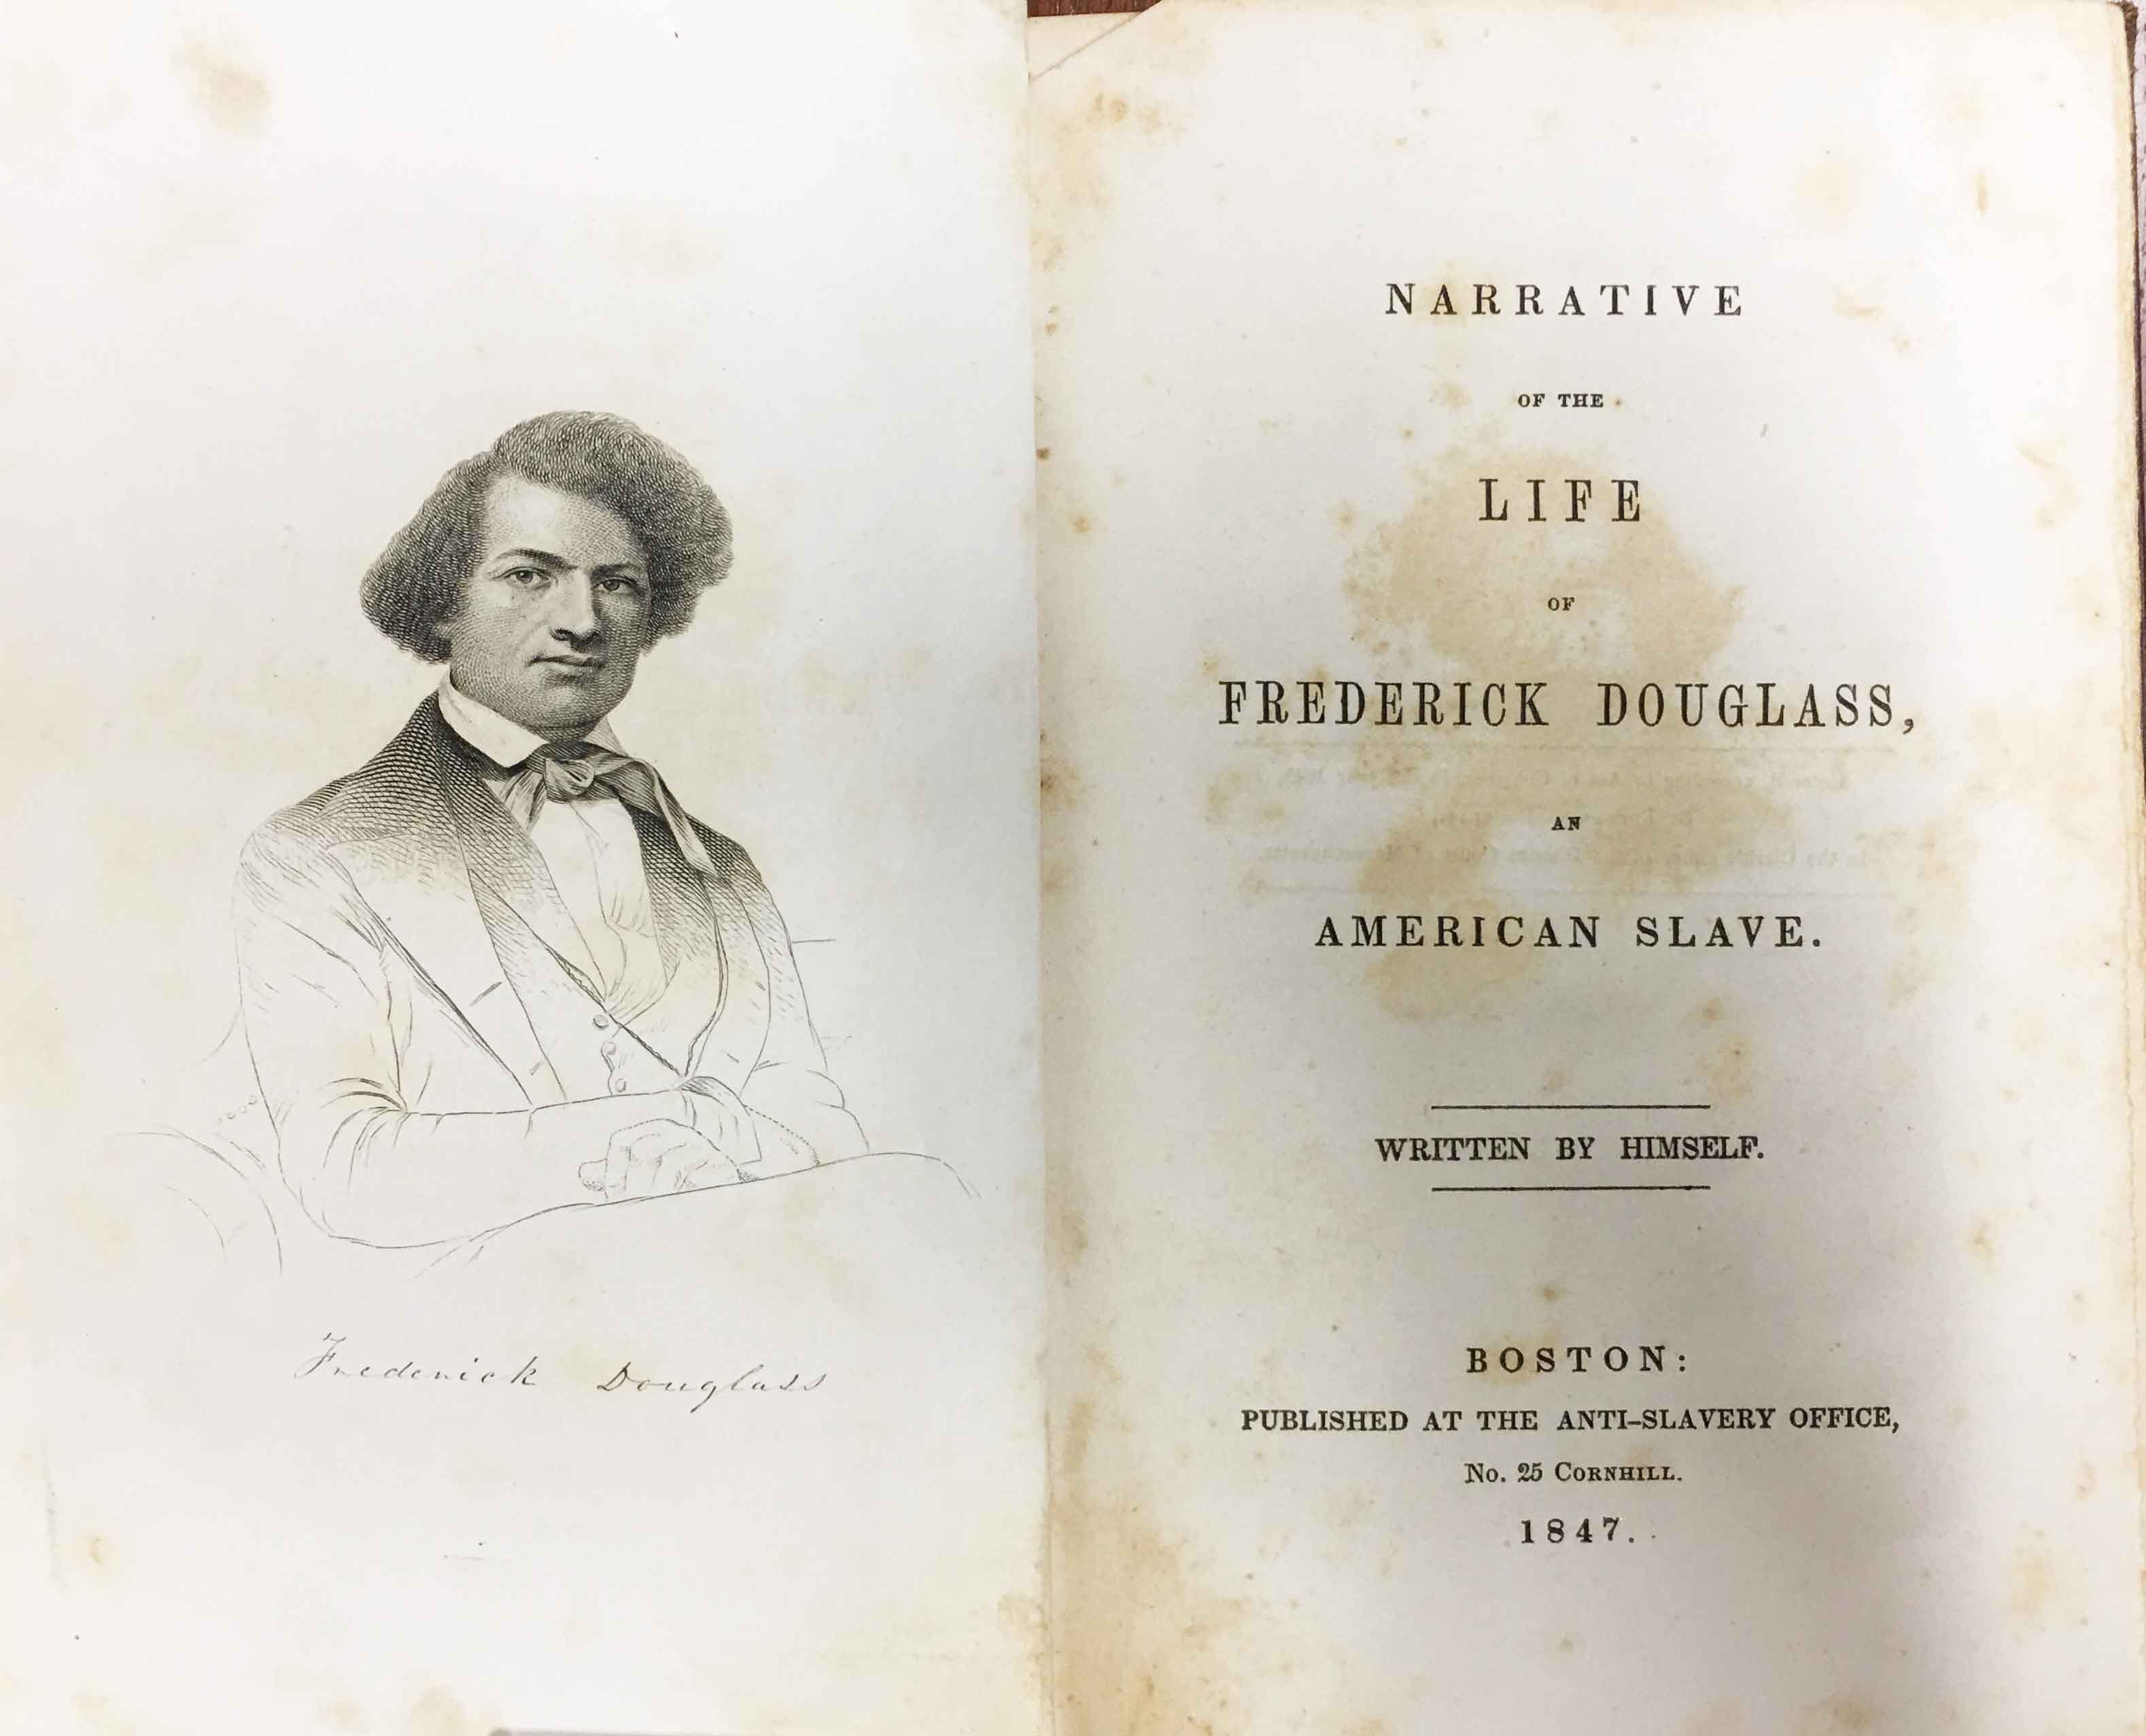 Copy of the book "Narrative of the Life of Frederick Douglass," open on a table to a portrait of Douglass and the title page